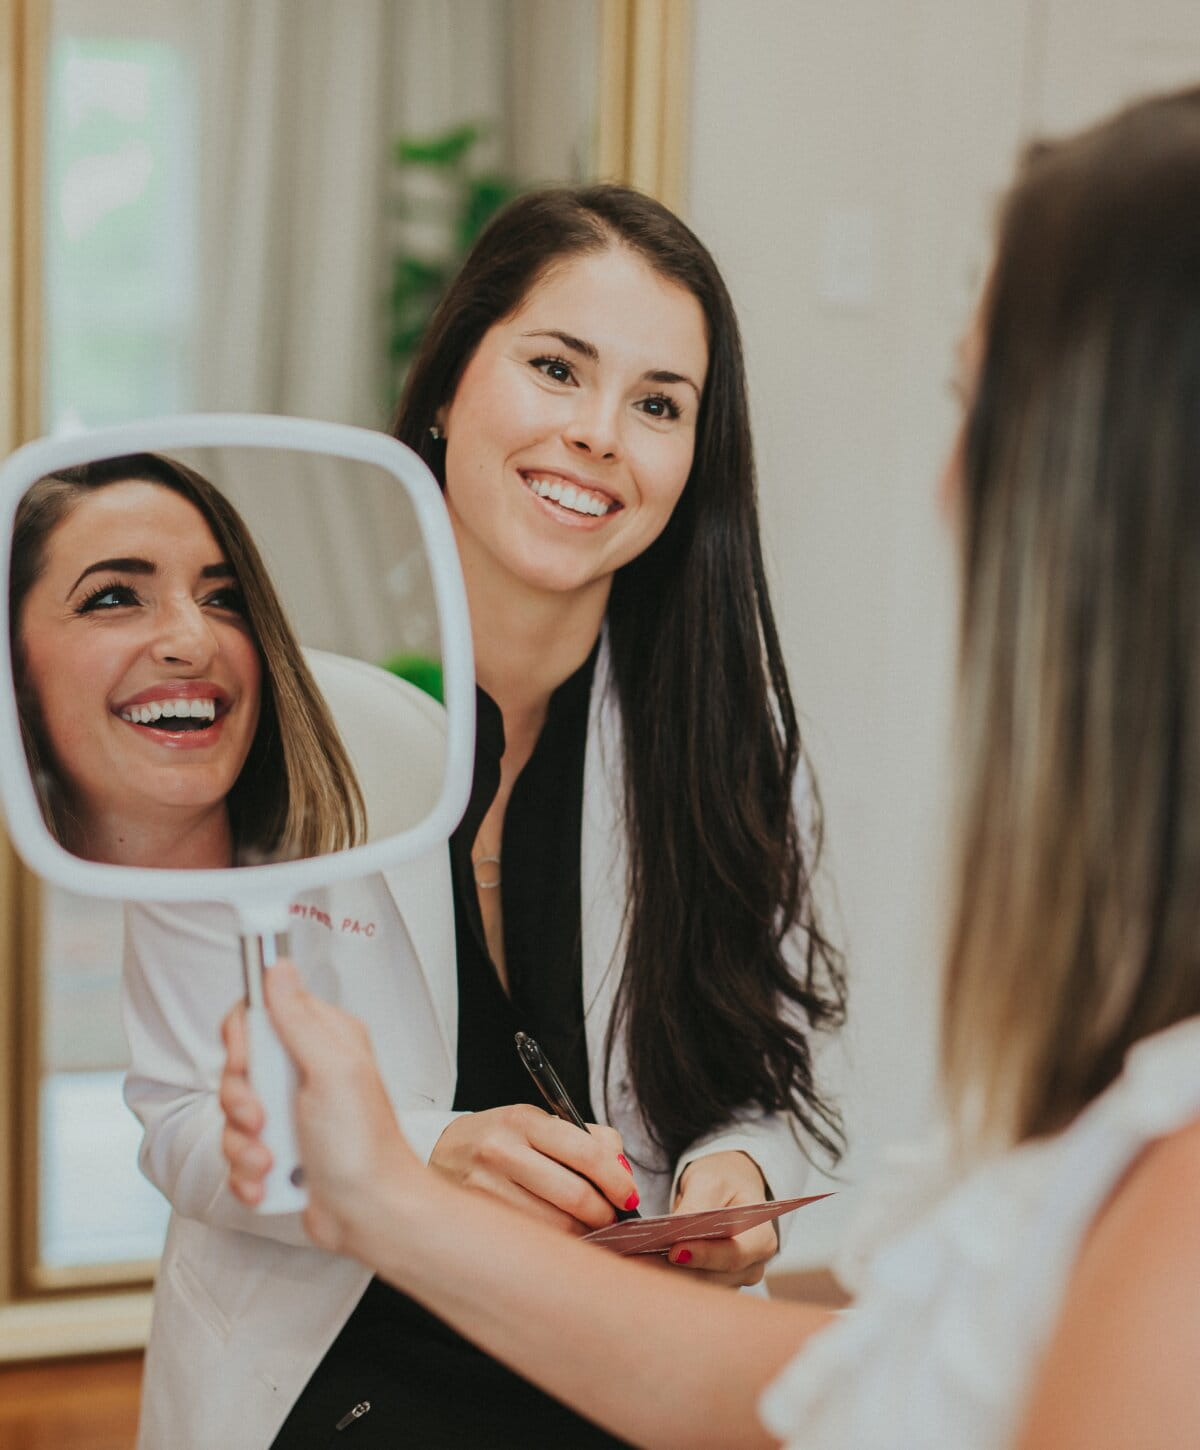 Woman smiling into mirror